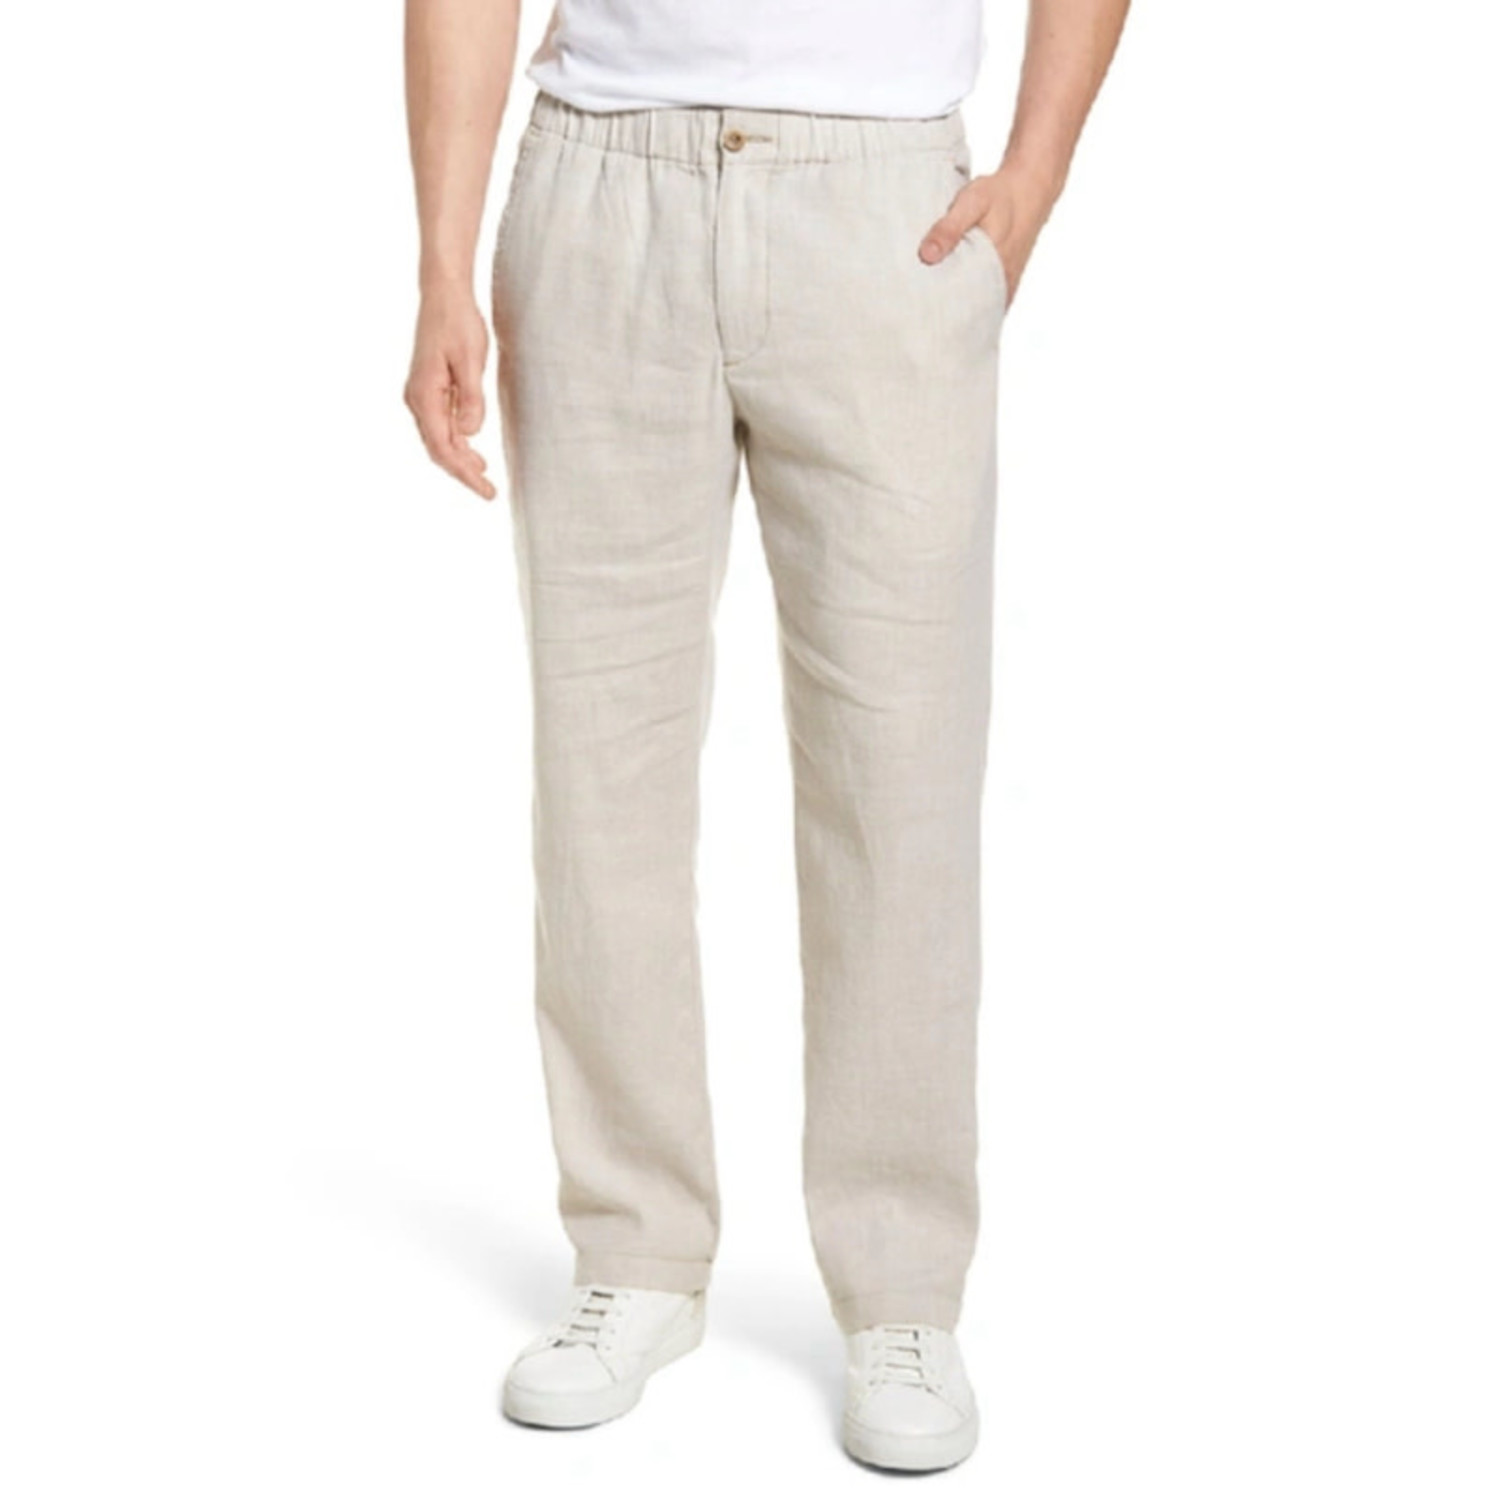 Tommy Bahama Casual Beach Pants for Women